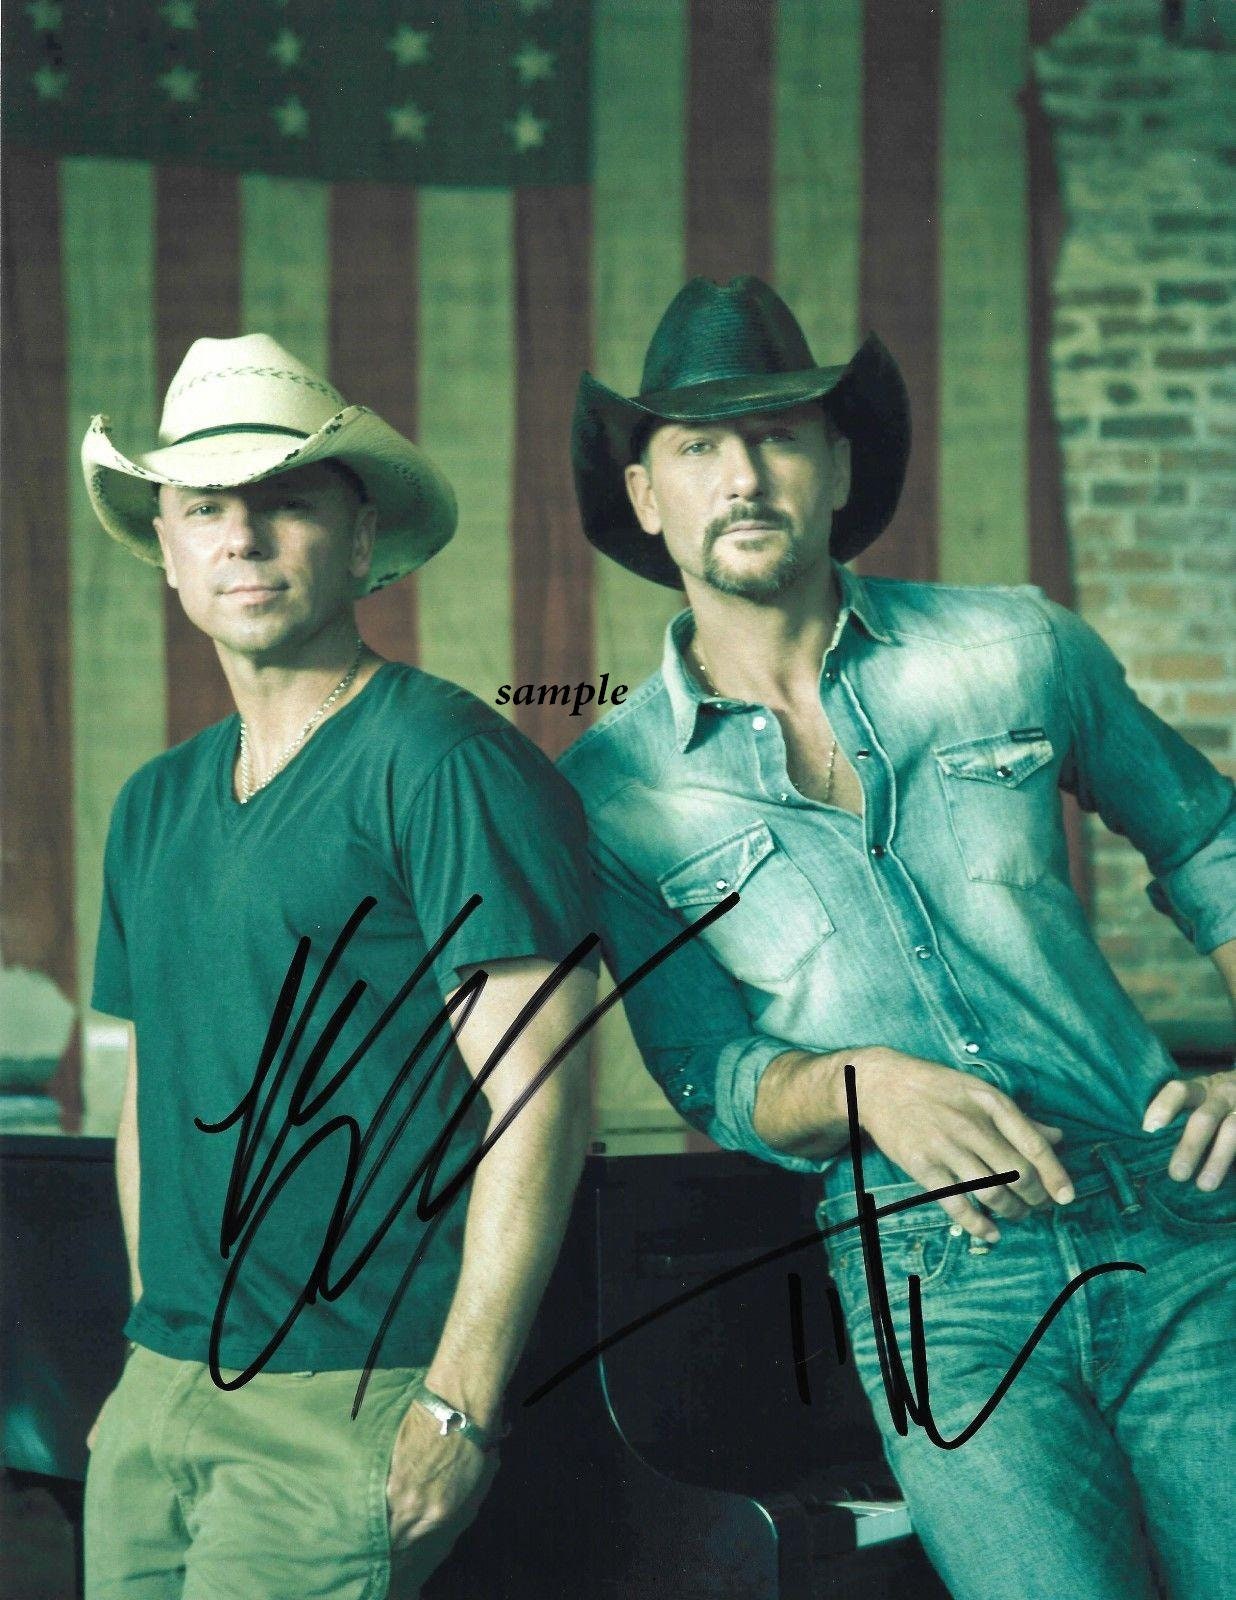 AUTOGRAPHED PICTURE SIGNED 8X10 PHOTO REPRINT 2 TIM MCGRAW 